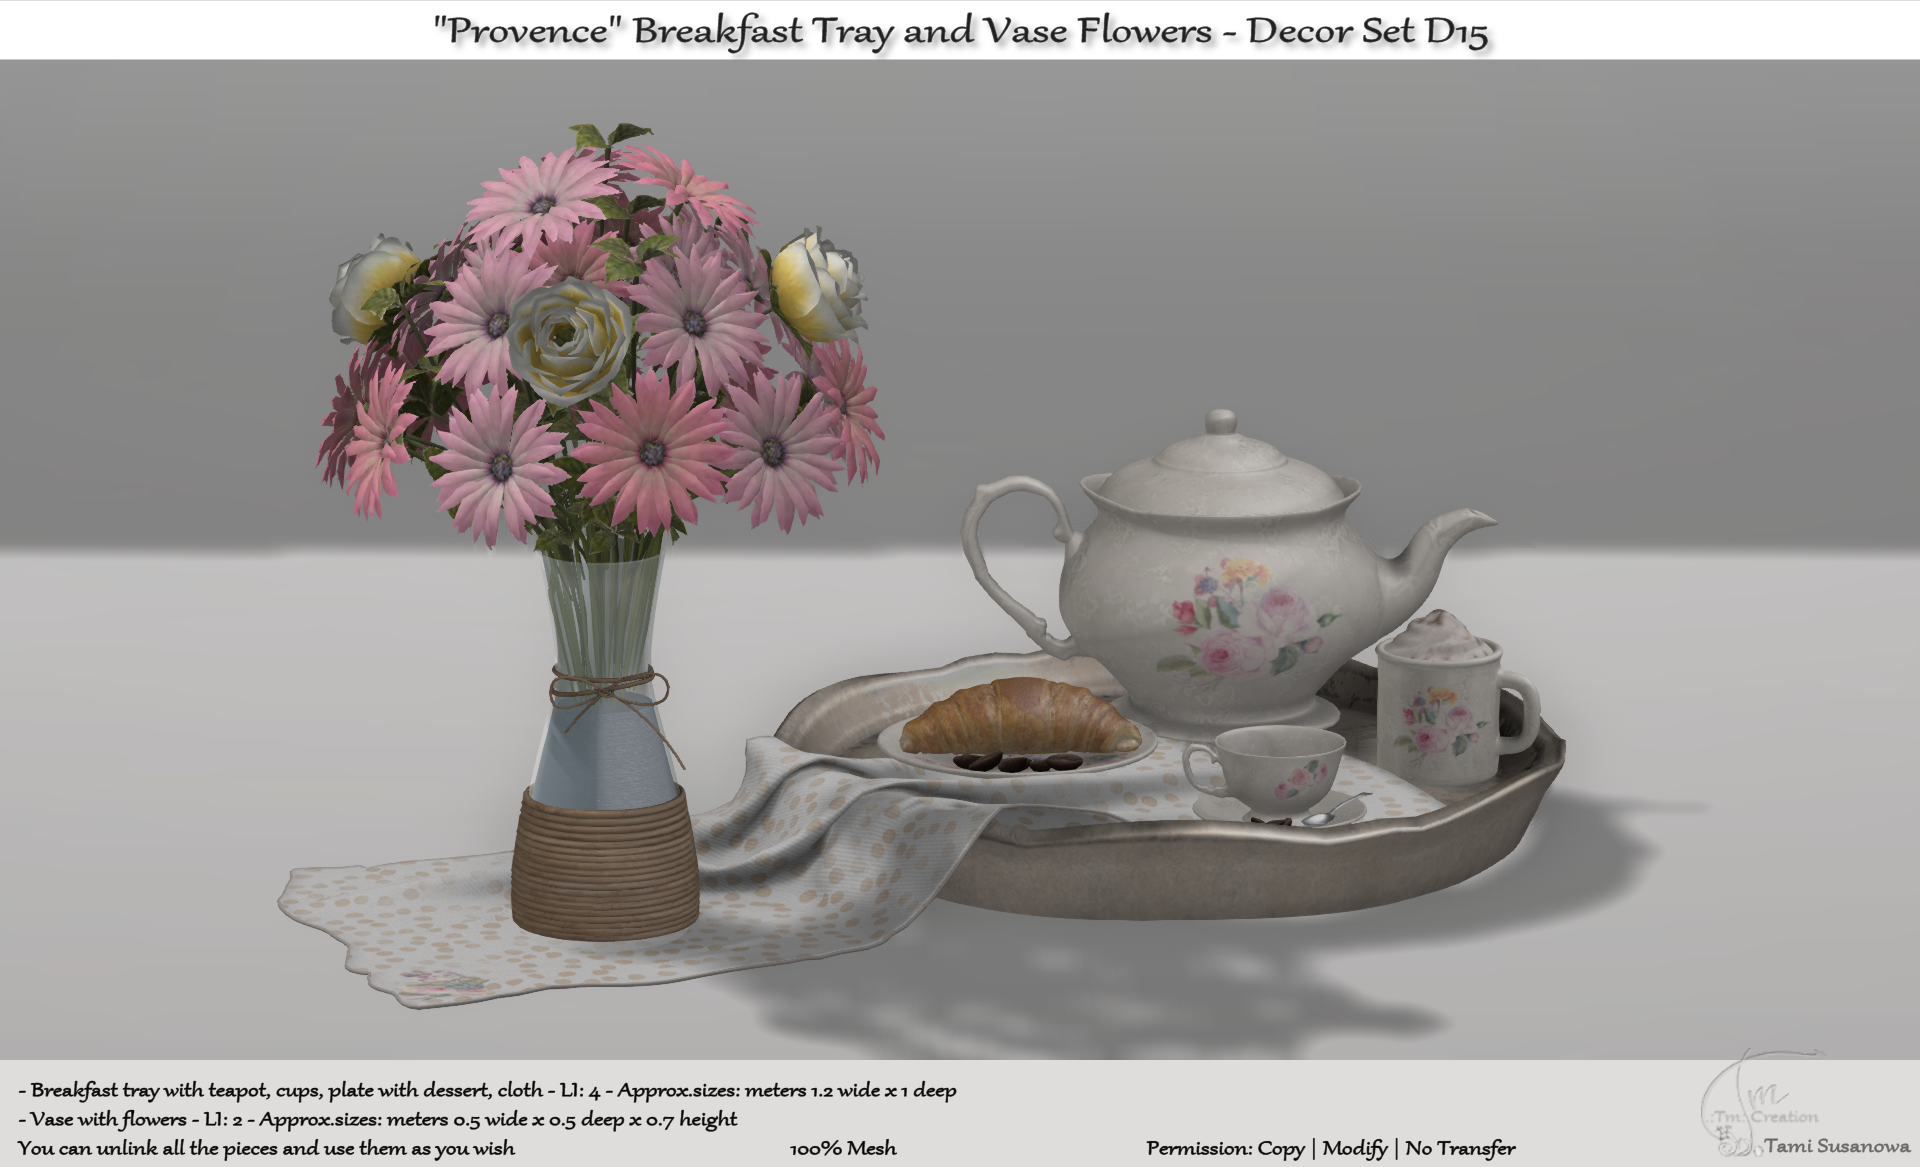 Tm Creation – “Provence” Breakfast Tray and Vase Flowers